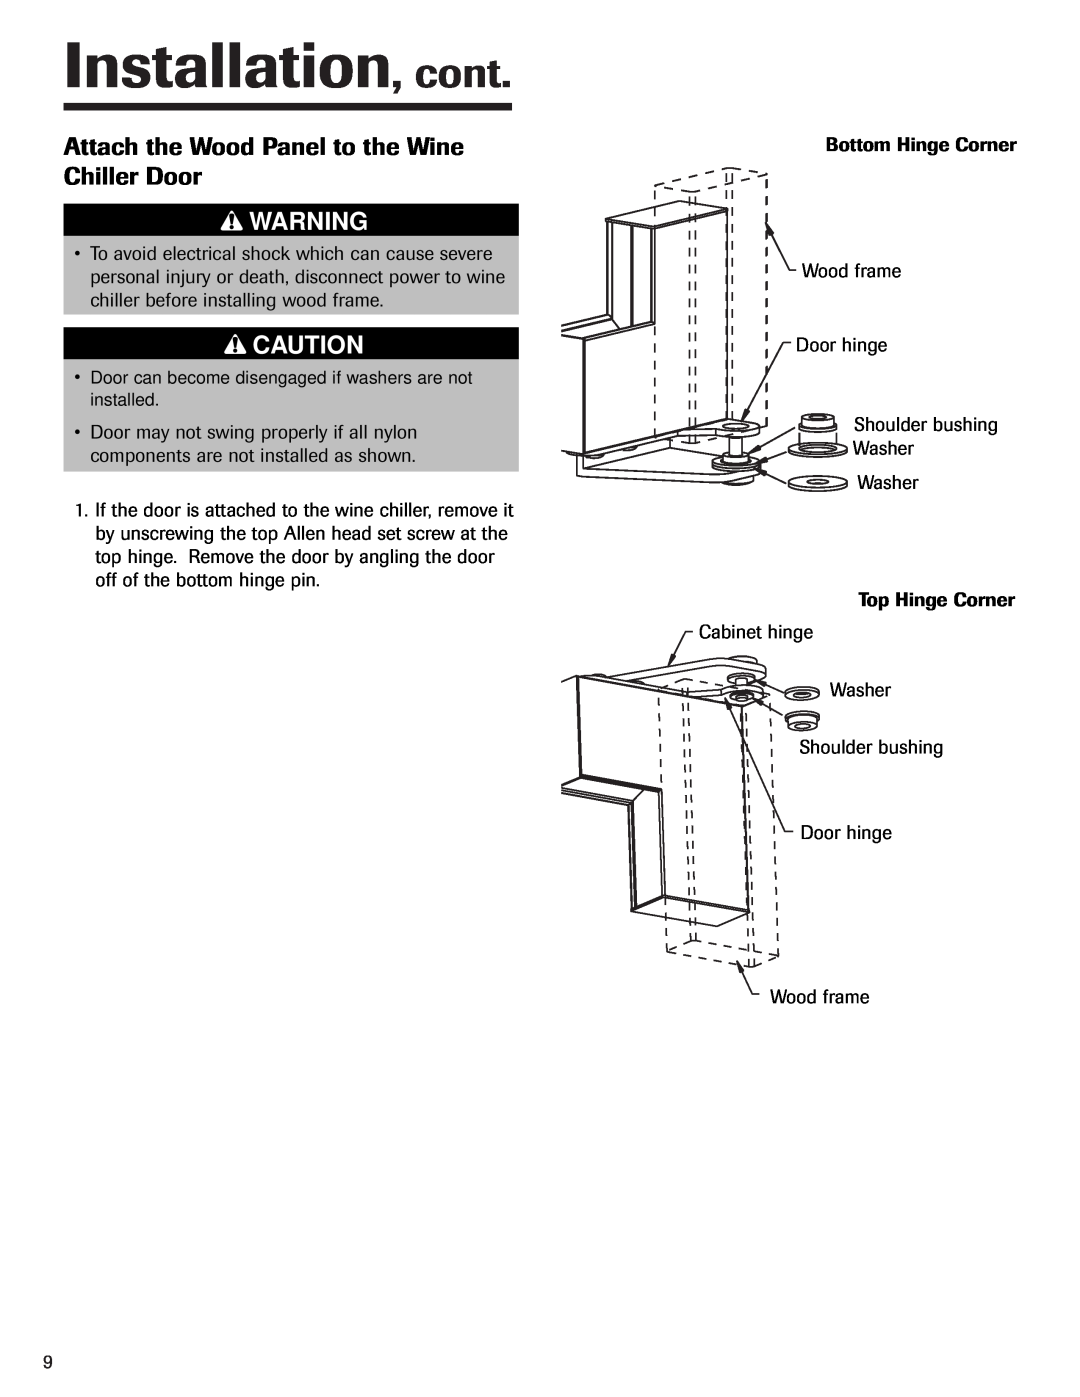 Jenn-Air 41007605 warranty Attach the Wood Panel to the Wine Chiller Door, Installation, cont 